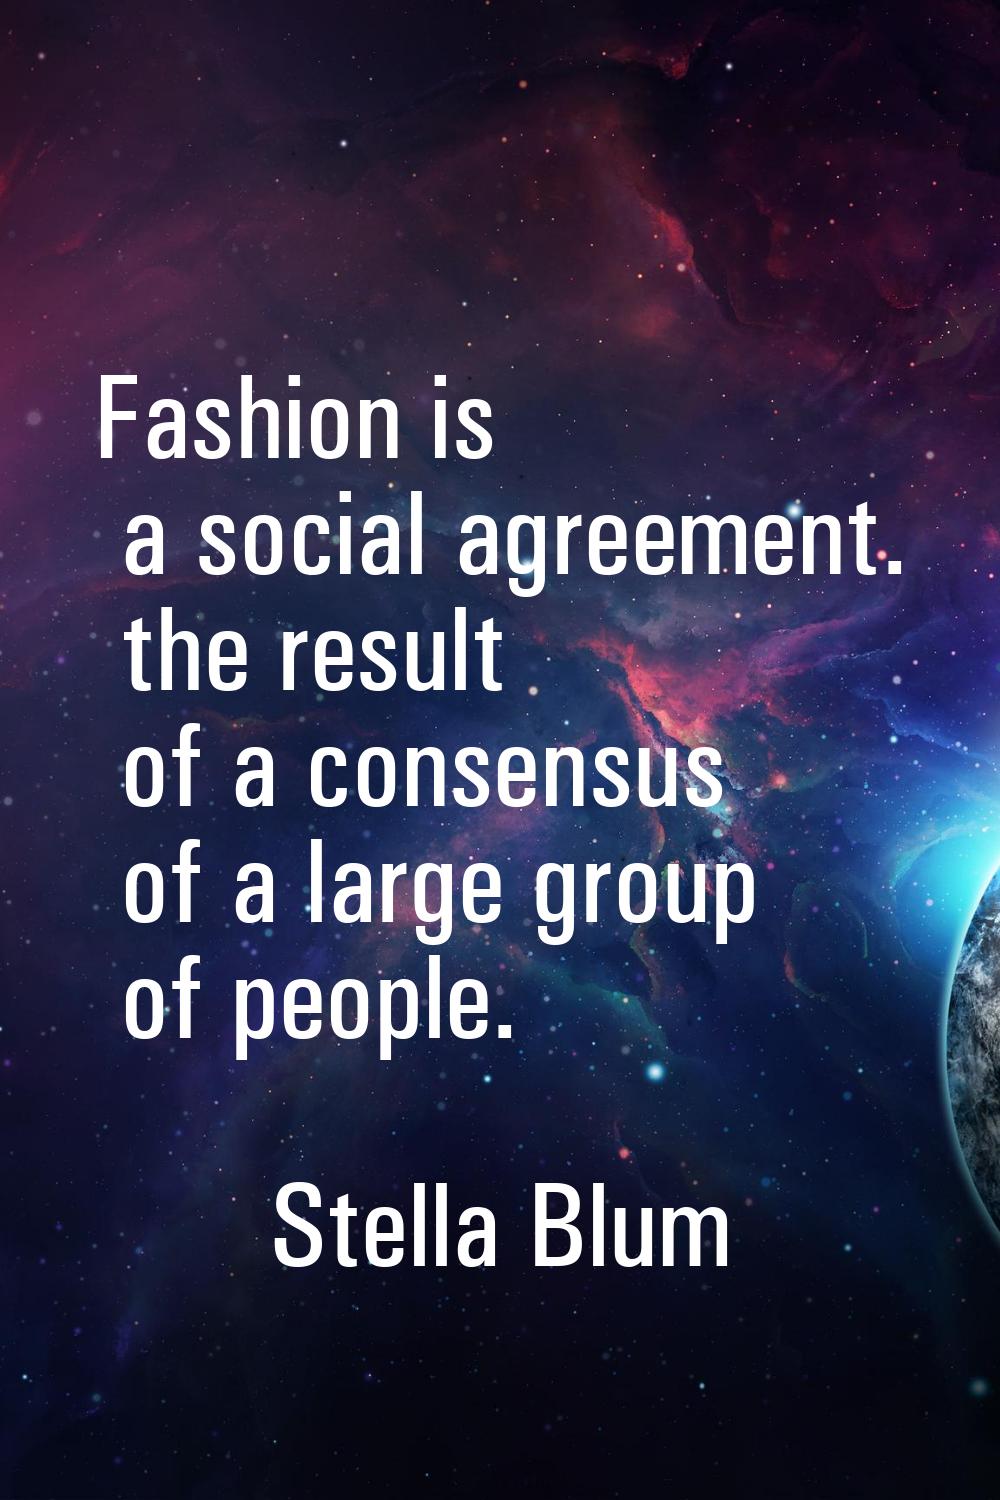 Fashion is a social agreement. the result of a consensus of a large group of people.